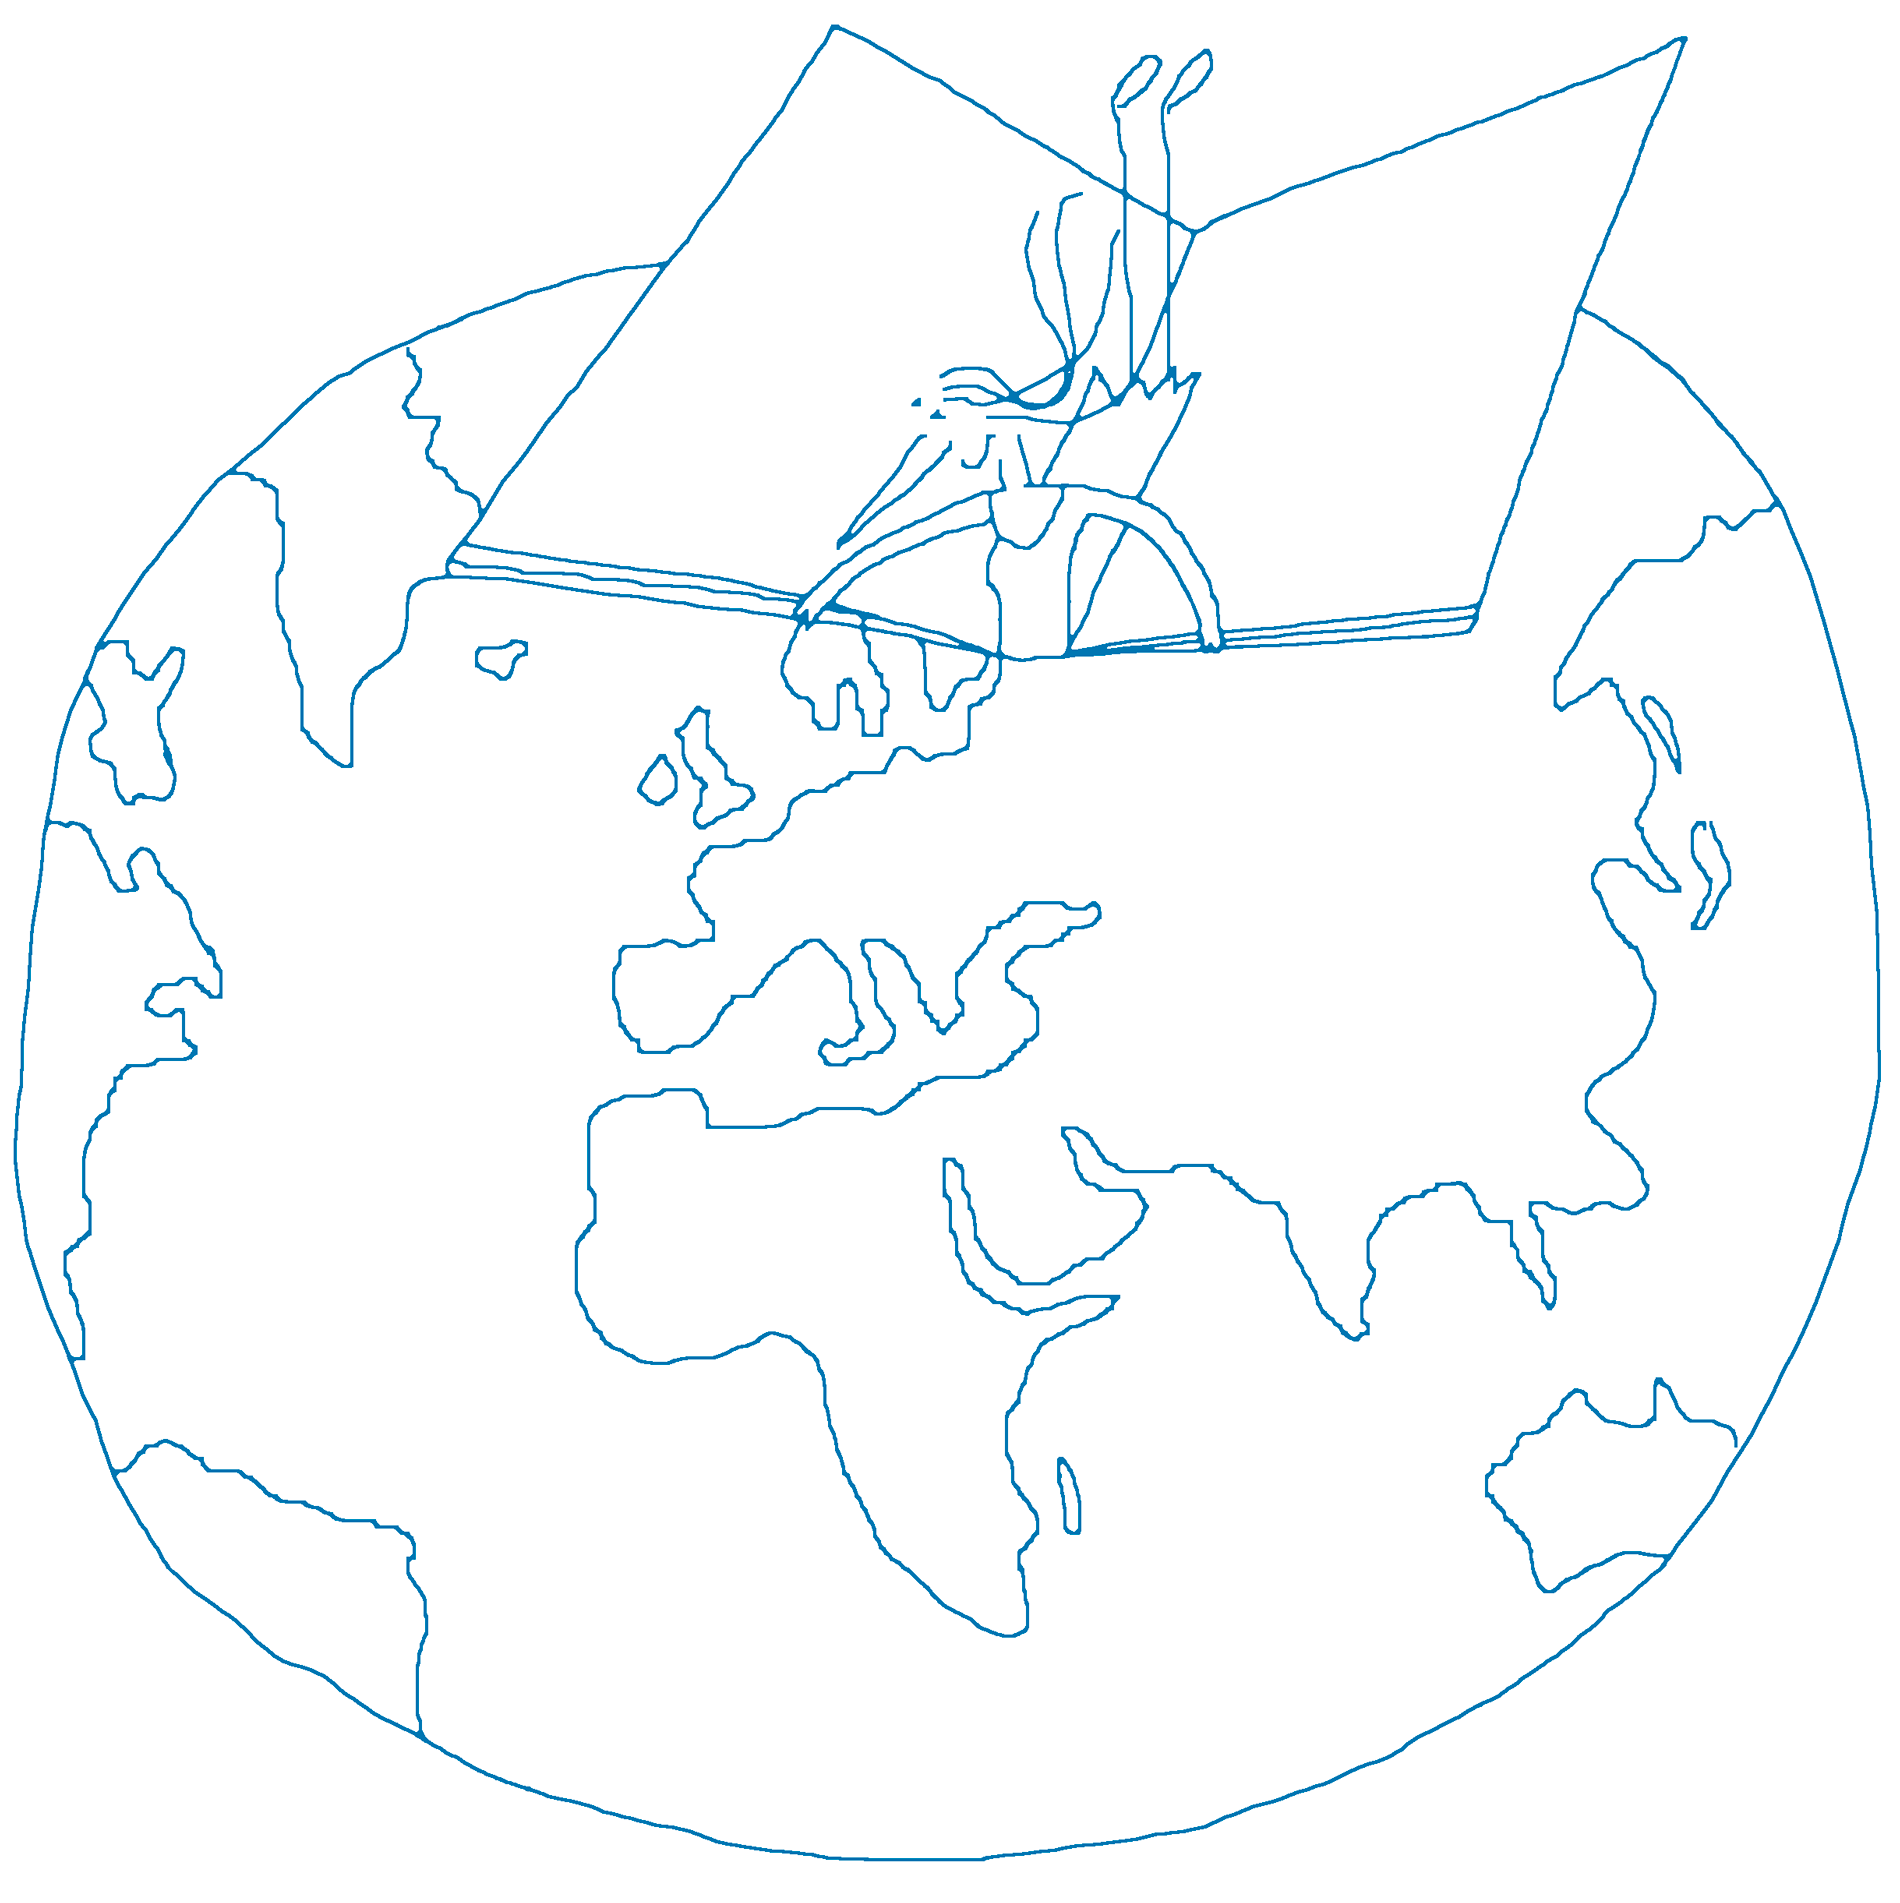 Shows a cartoon woman, laying inside an open book, holding onto the end, flying over a drawing of the top of the world